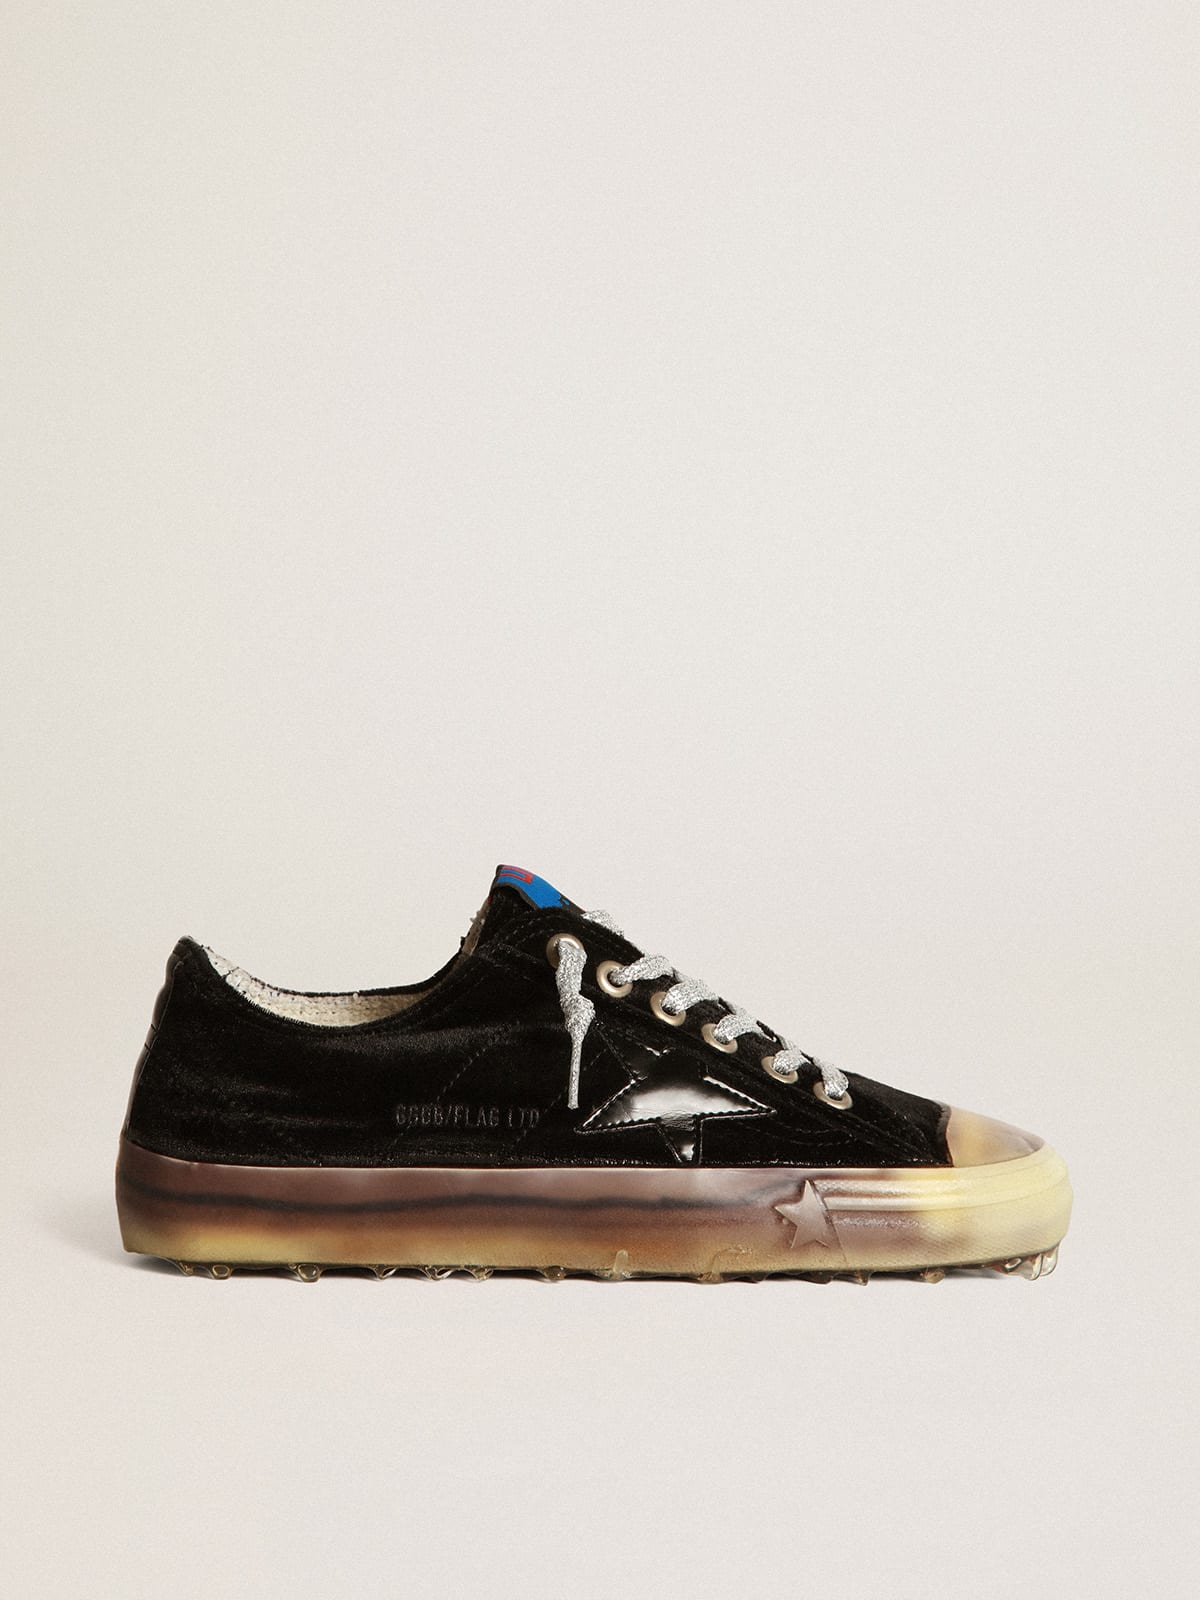 V-Star LTD sneakers in black velvet with a black laminated leather star and heel tab